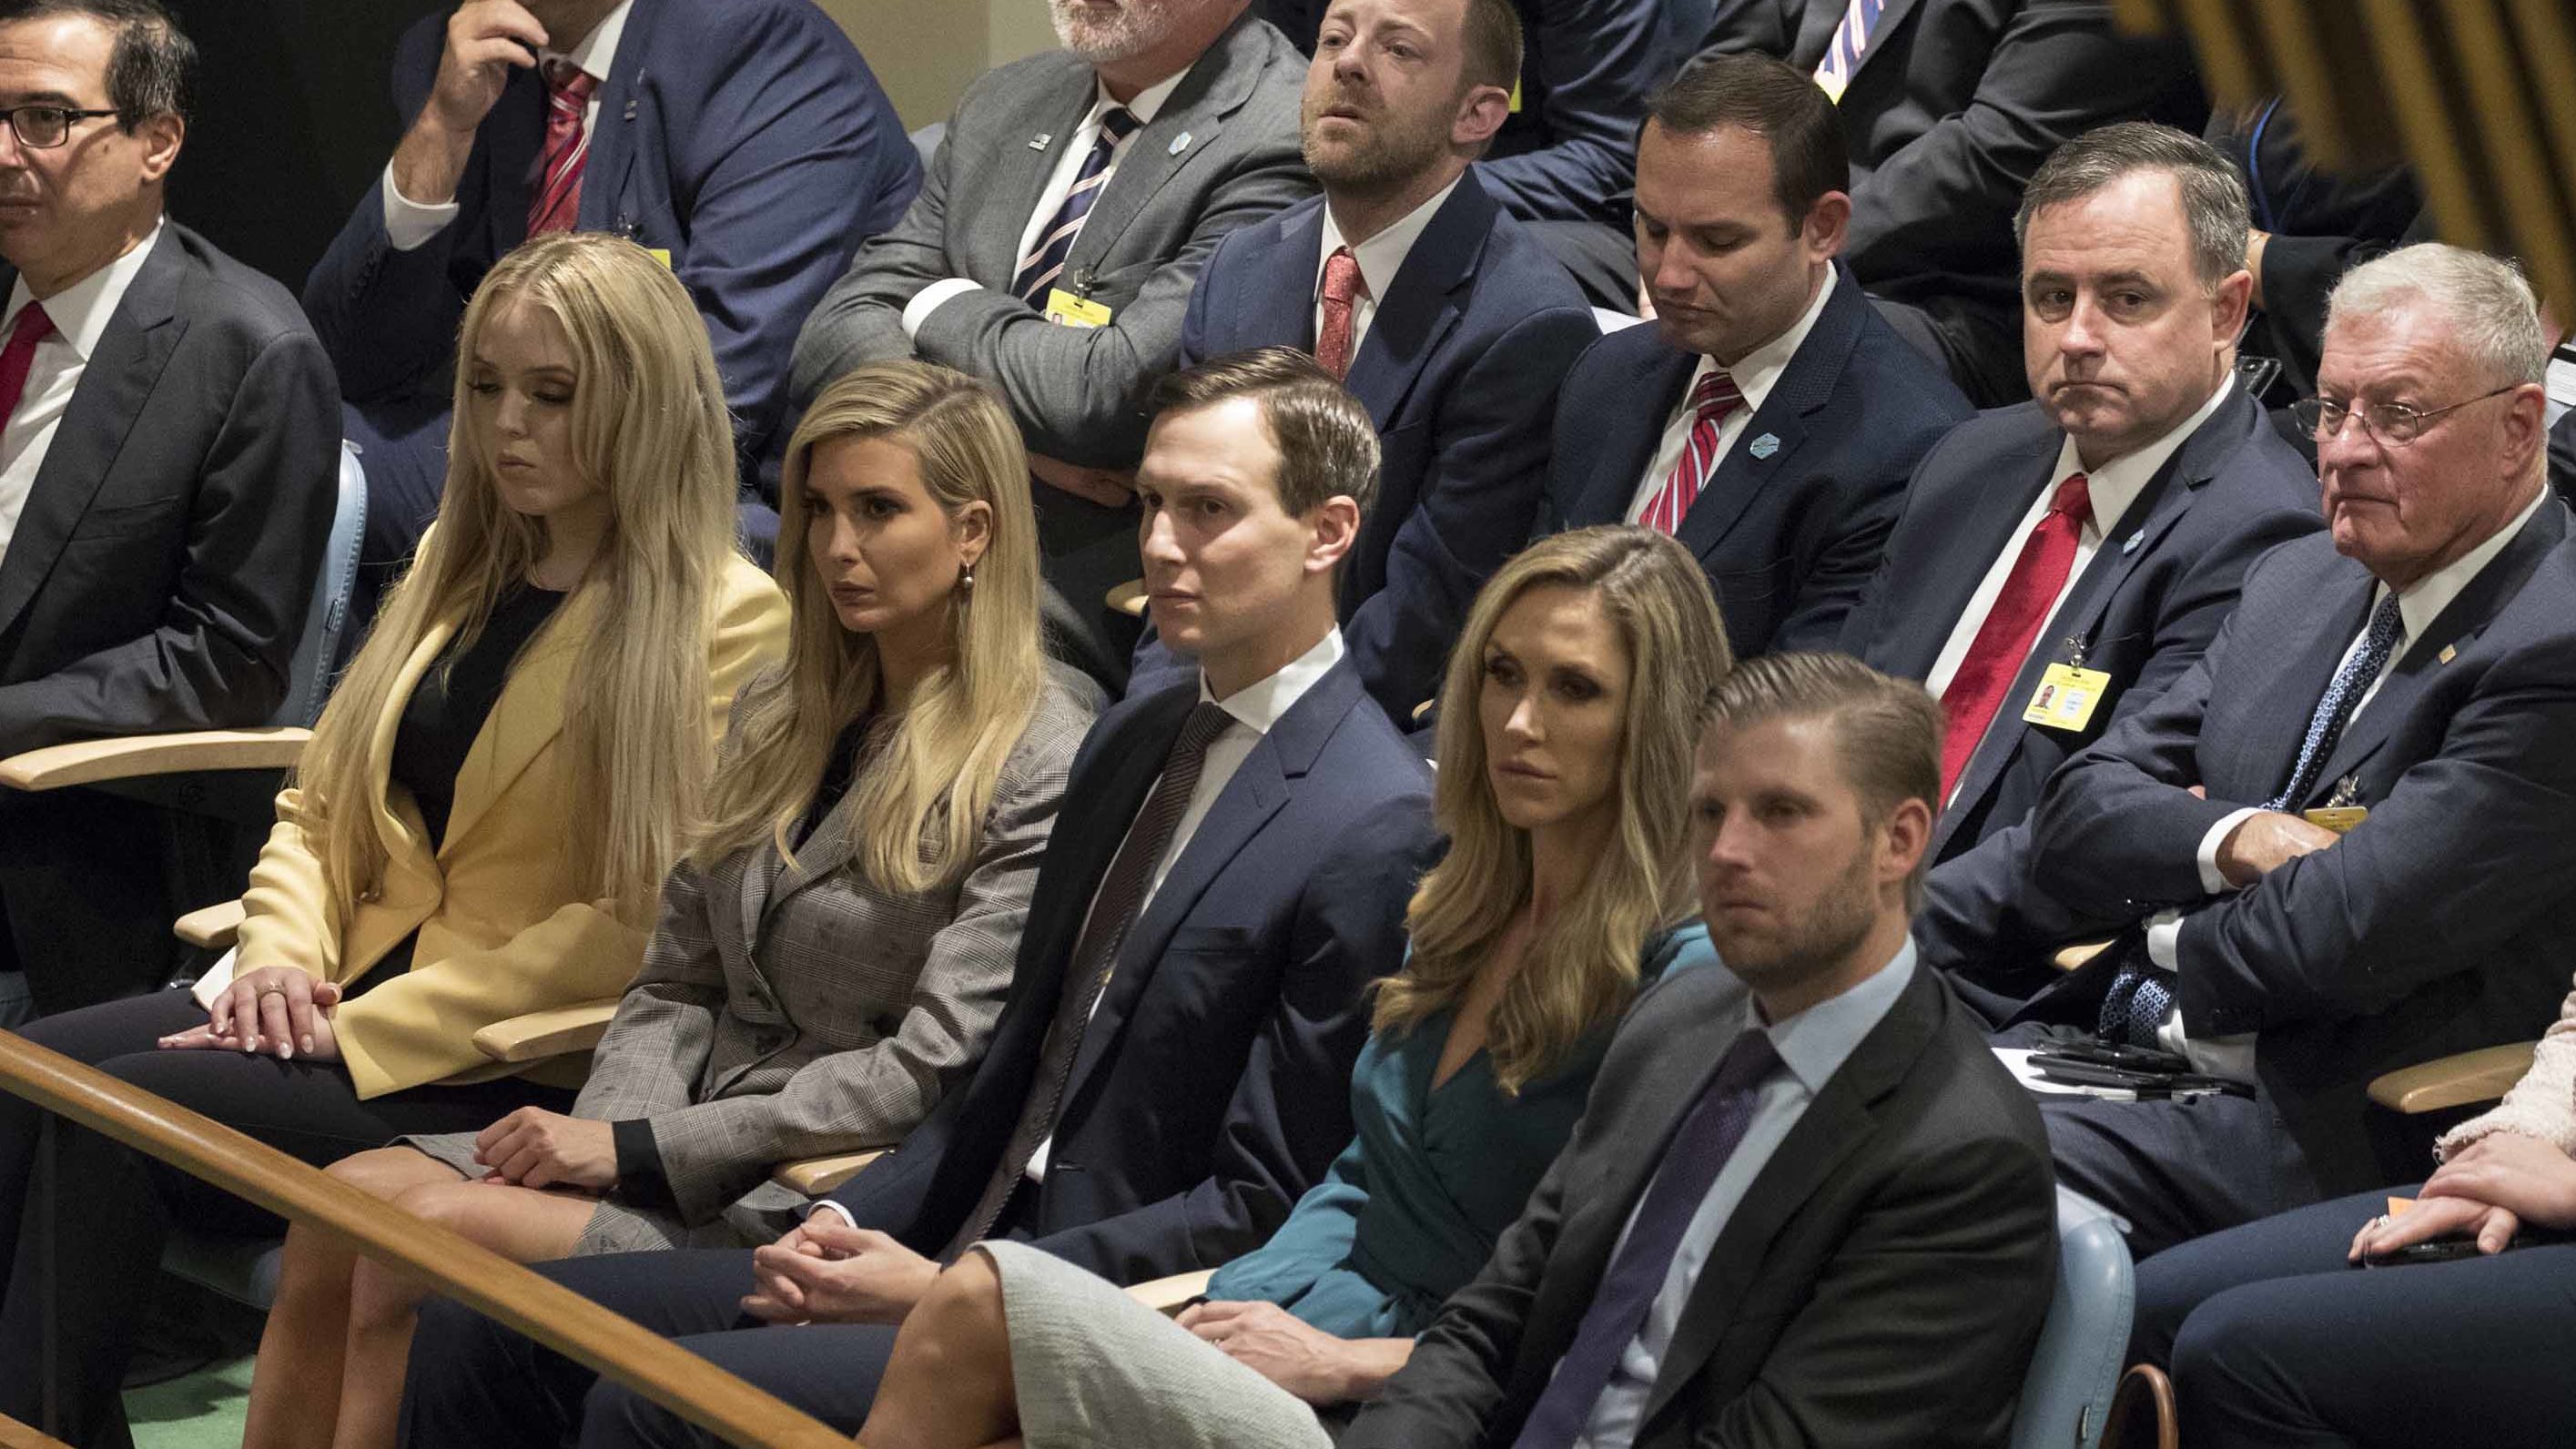 A few of Trump's children listen to his speech Tuesday. In the front row, from right, are son Eric, daughter-in-law Lara, son-in-law Jared Kushner, daughter Ivanka and daughter Tiffany.